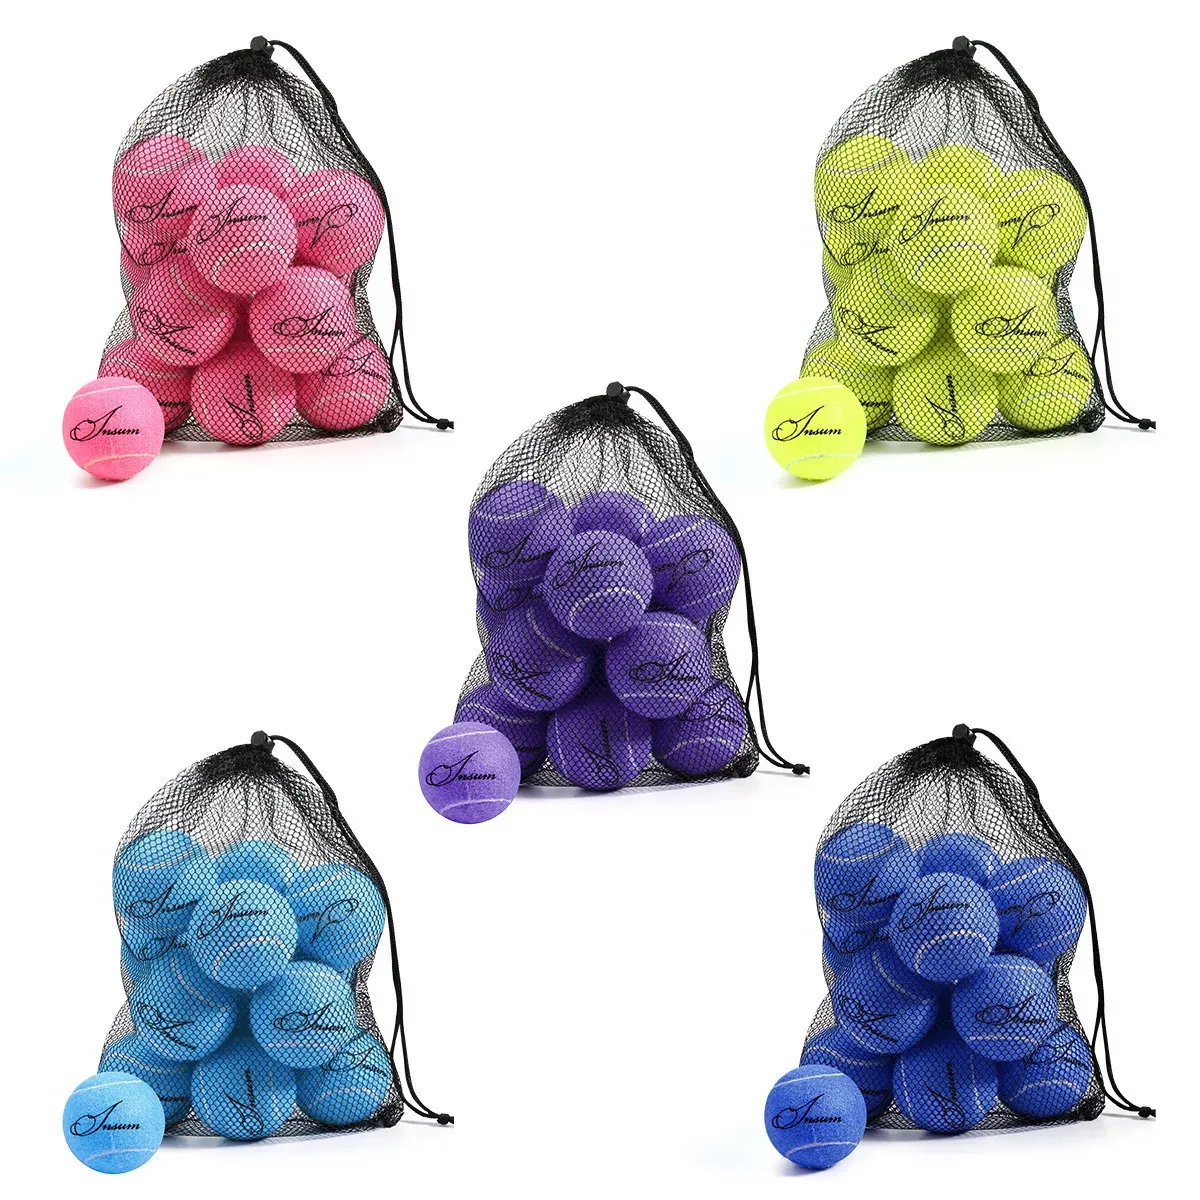 Insum Tennis Balls 12st Mesh Bag For Easy Carry 4 Color Options Dog Pet Toy and Nybörjare Training 240124